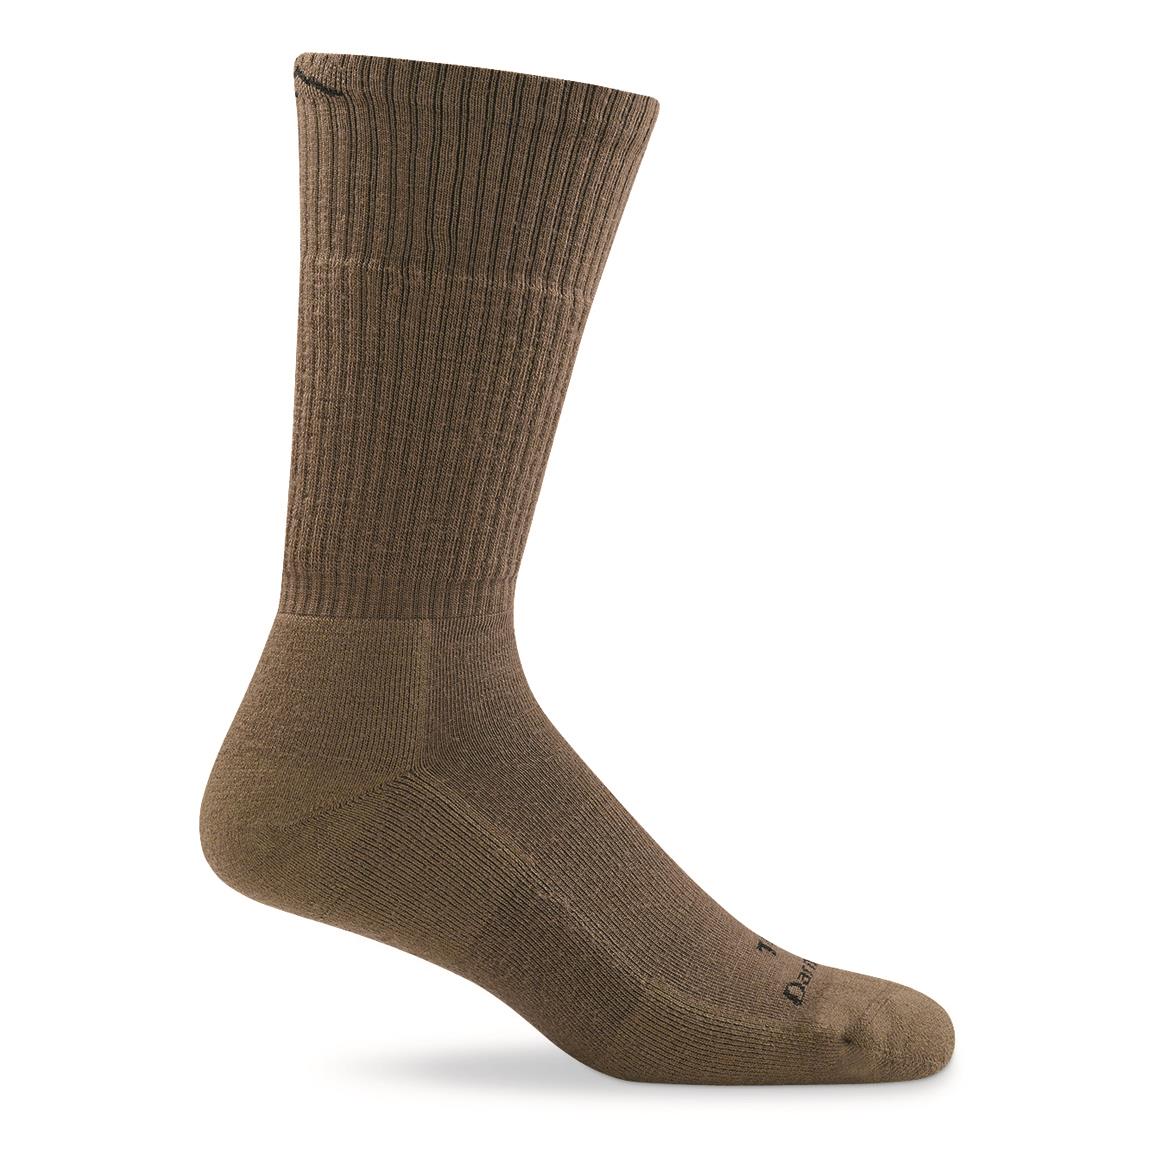 Darn Tough Unisex T4021 Tactical Boot Cushion Socks, Coyote Brown